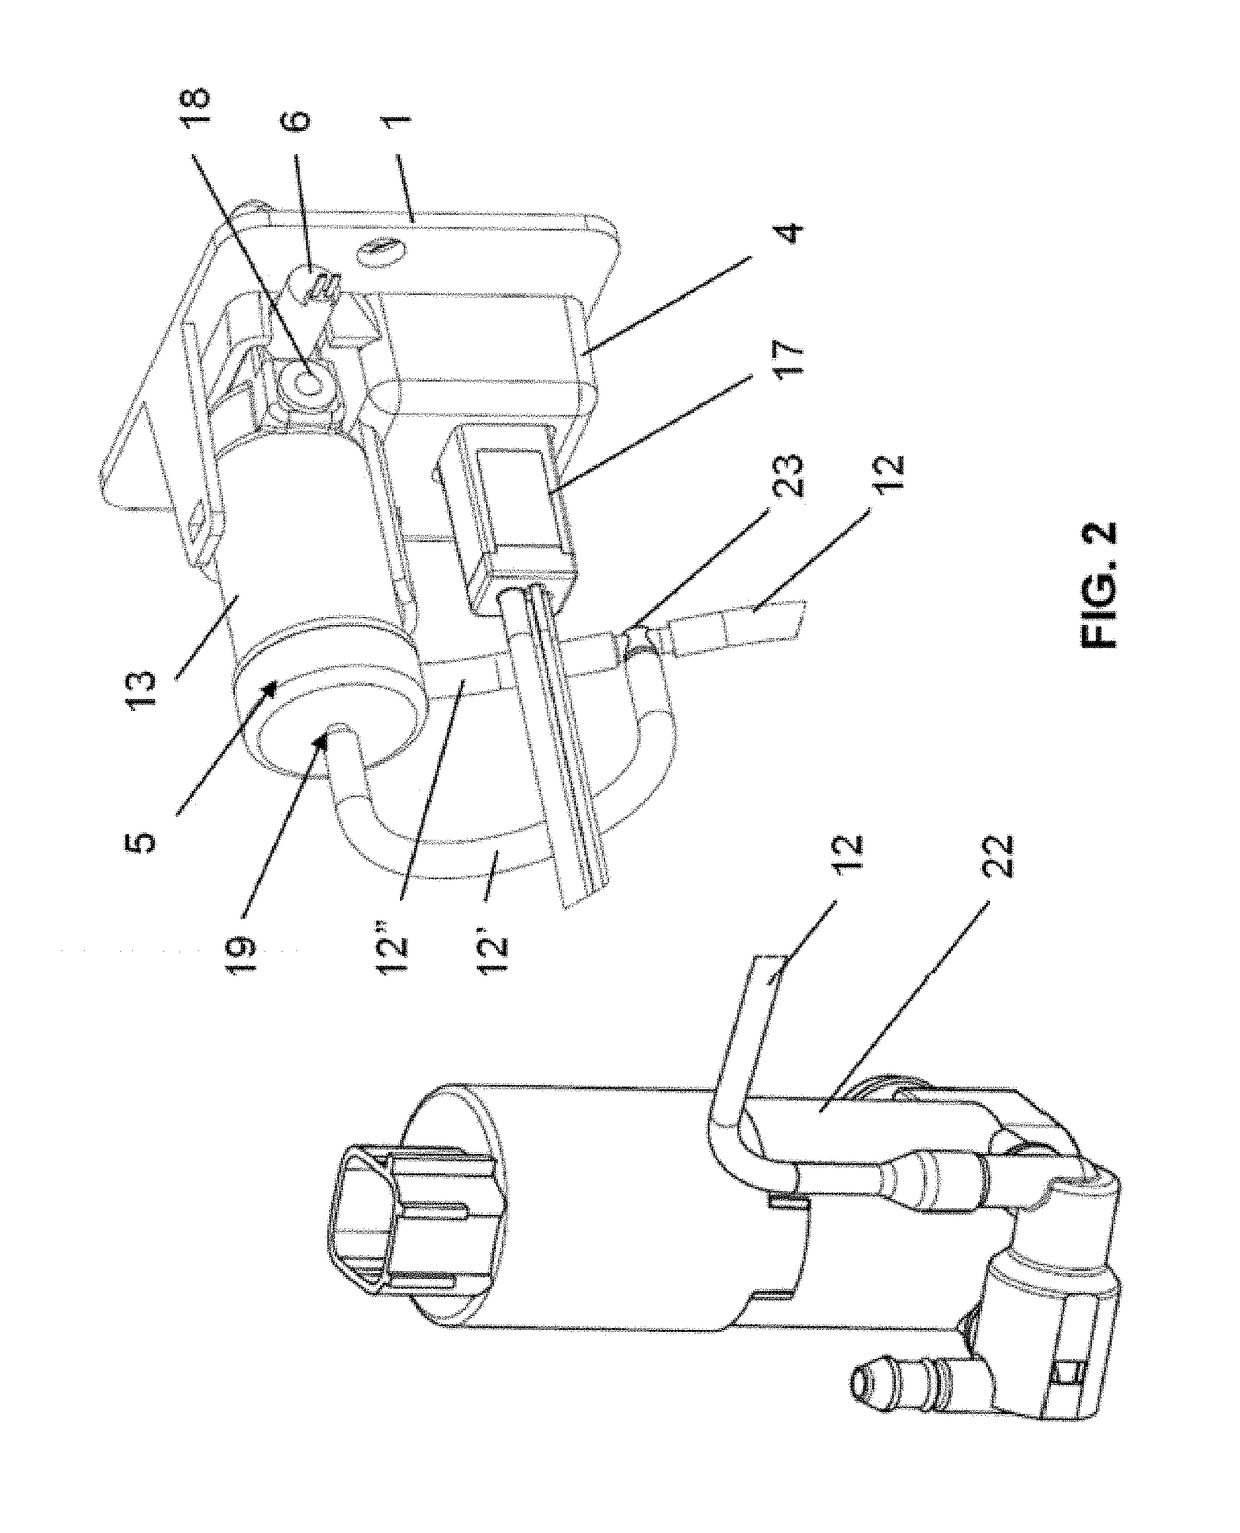 System and method for cleaning a vehicle-mounted sensor